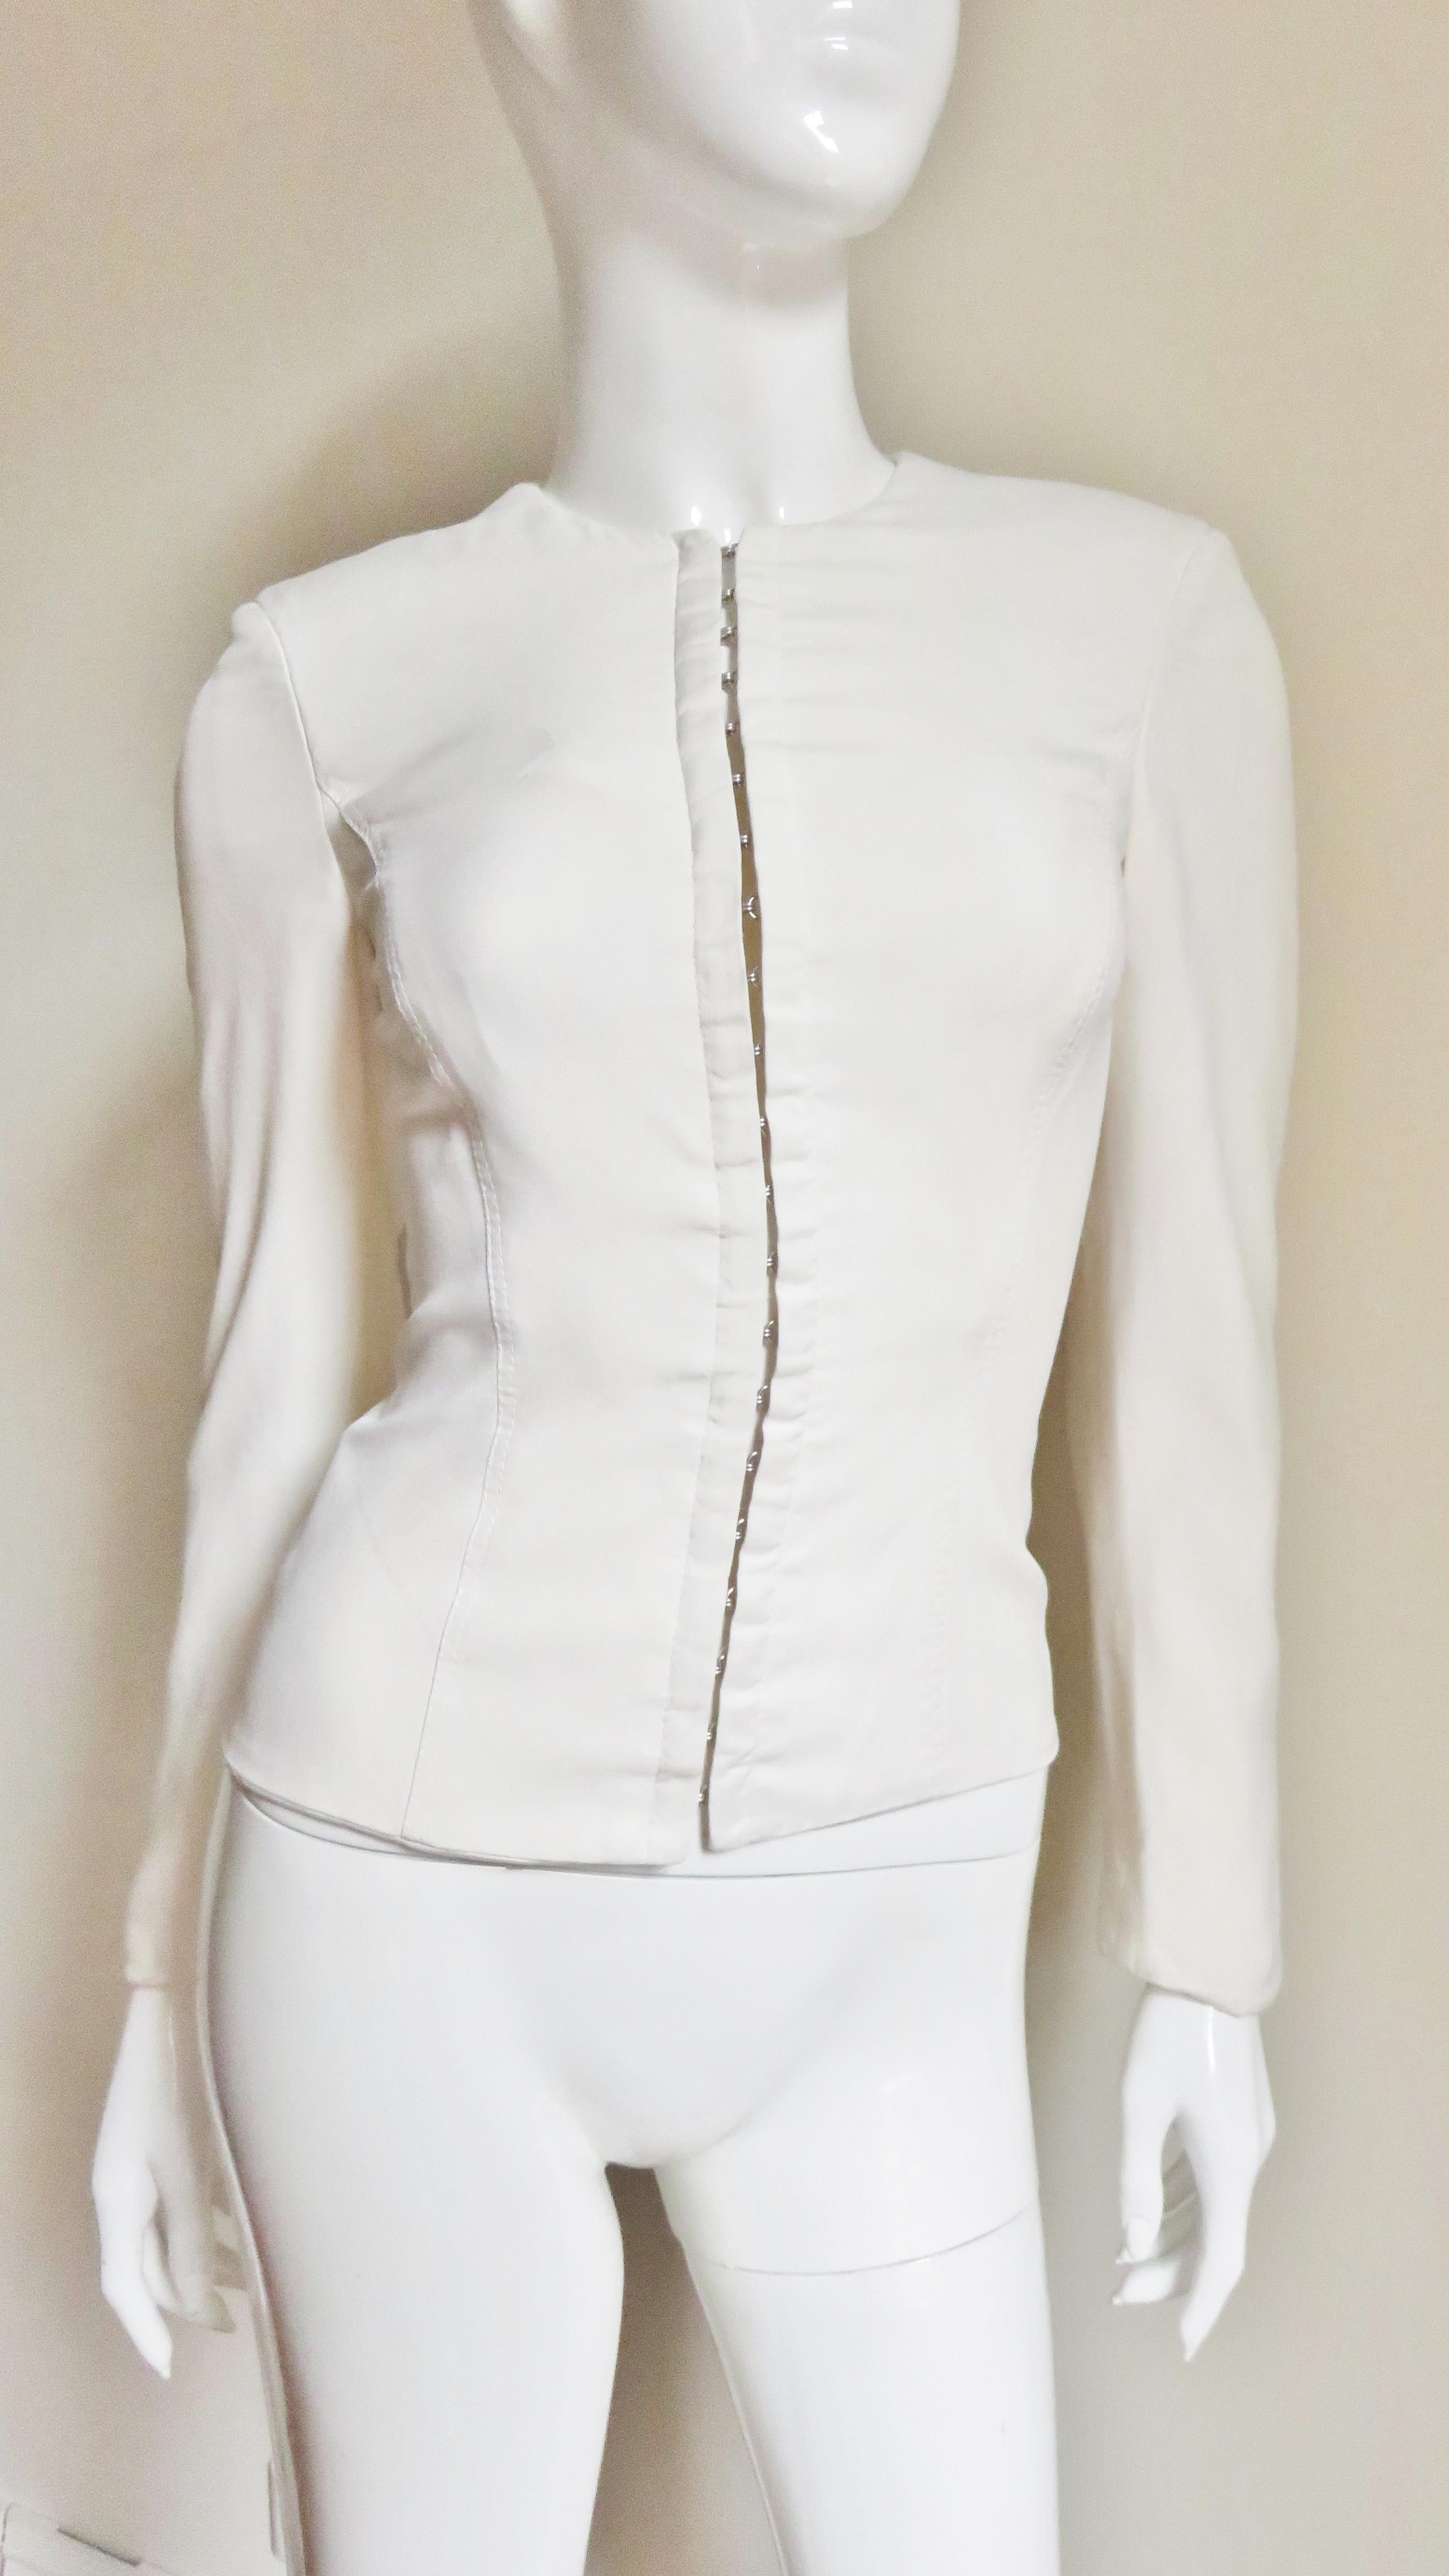  Gianni Versace Silk Lace up Back Jacket In Good Condition For Sale In Water Mill, NY